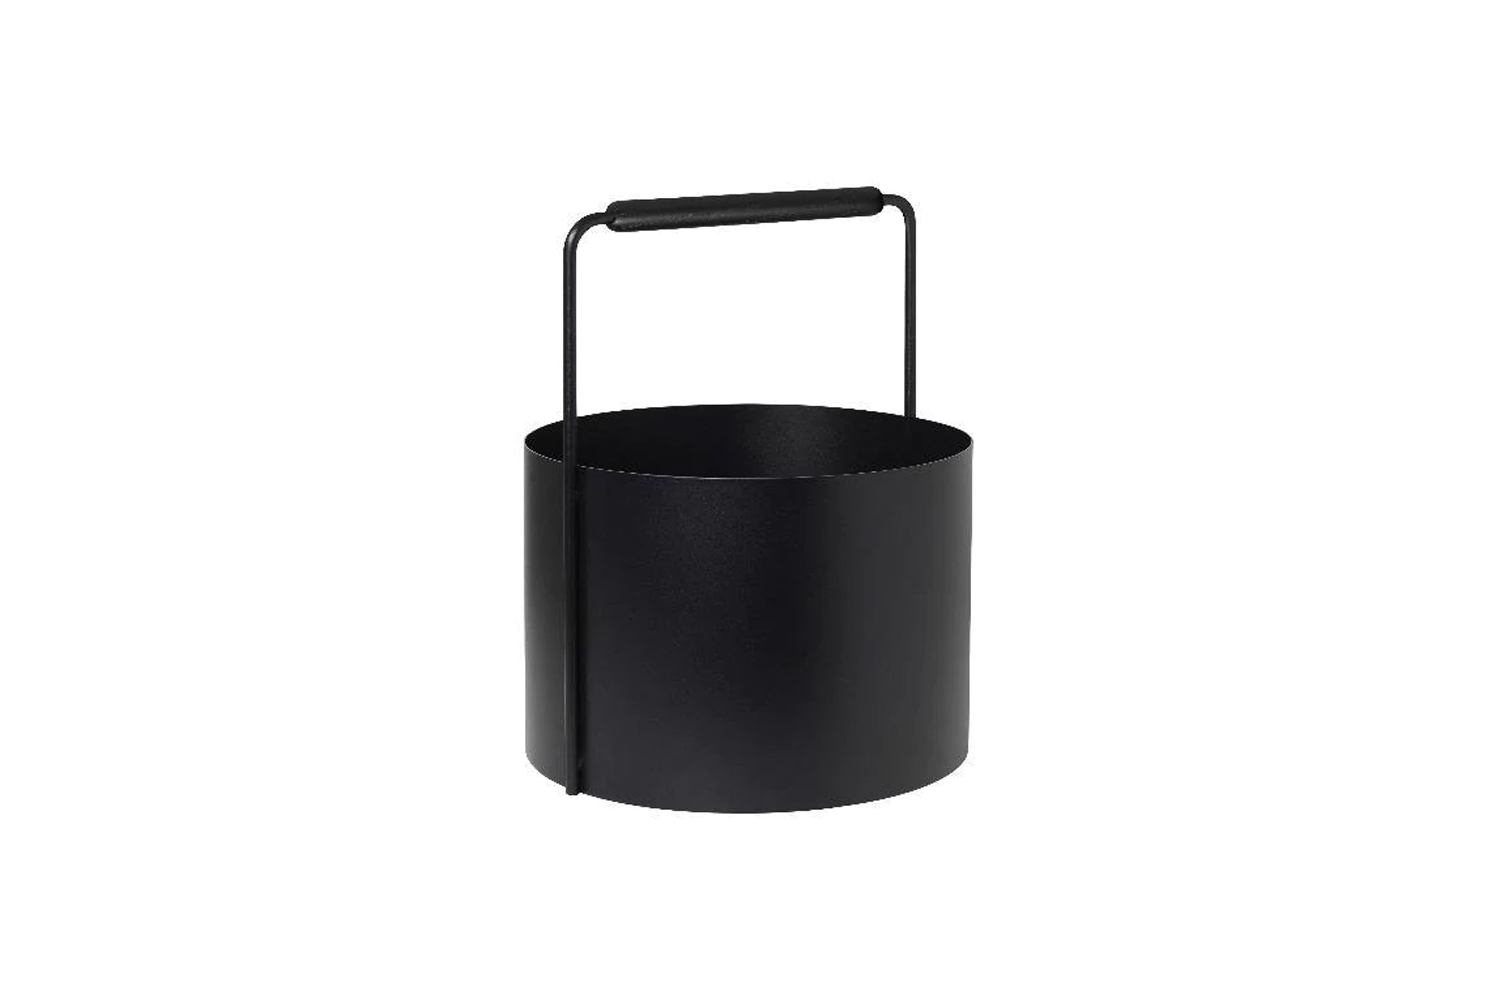 the blomus ashi firewood basket with a black handle is \$\279.99 at burke decor. 10